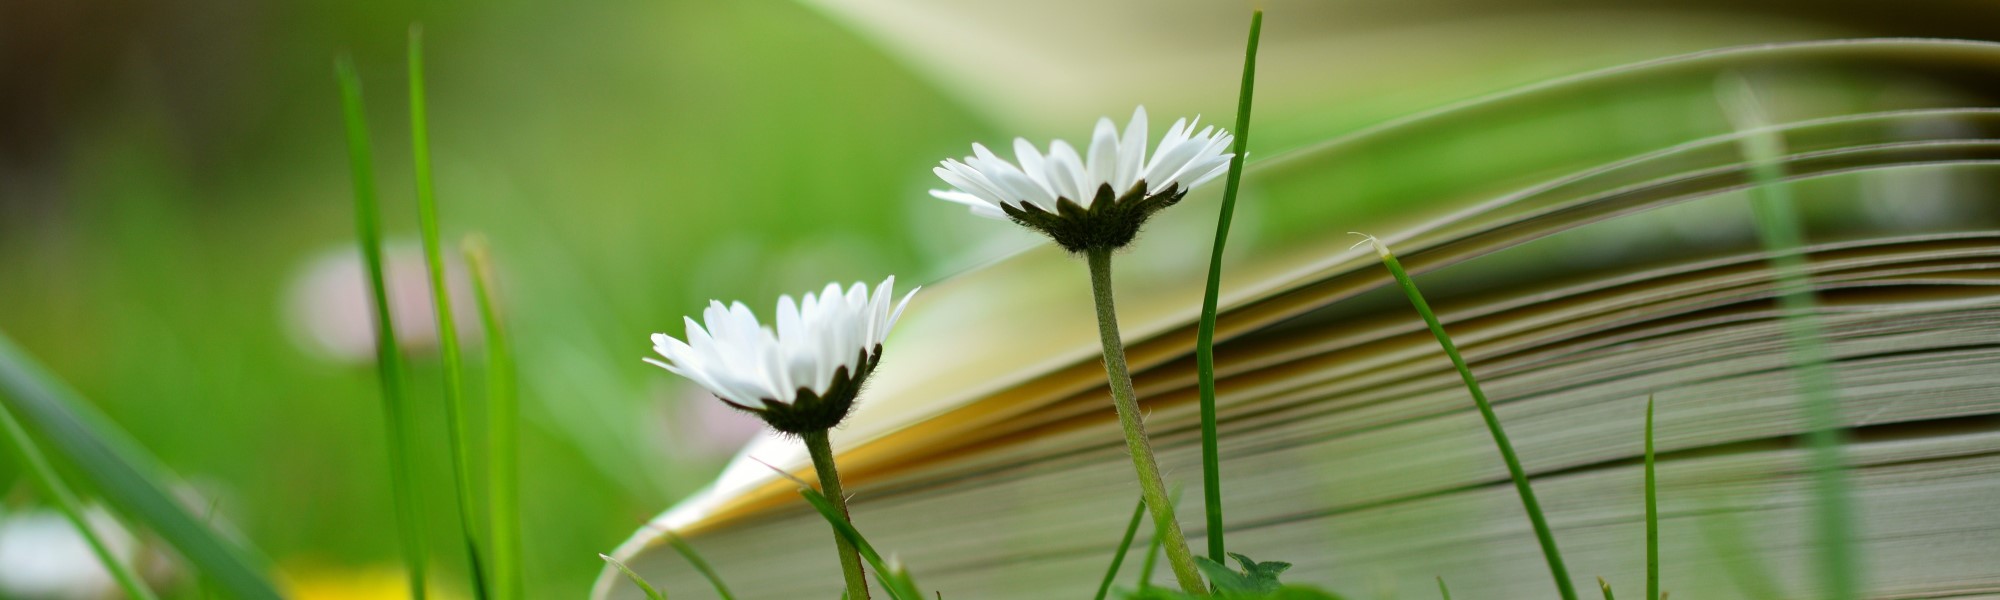 page header with flowers